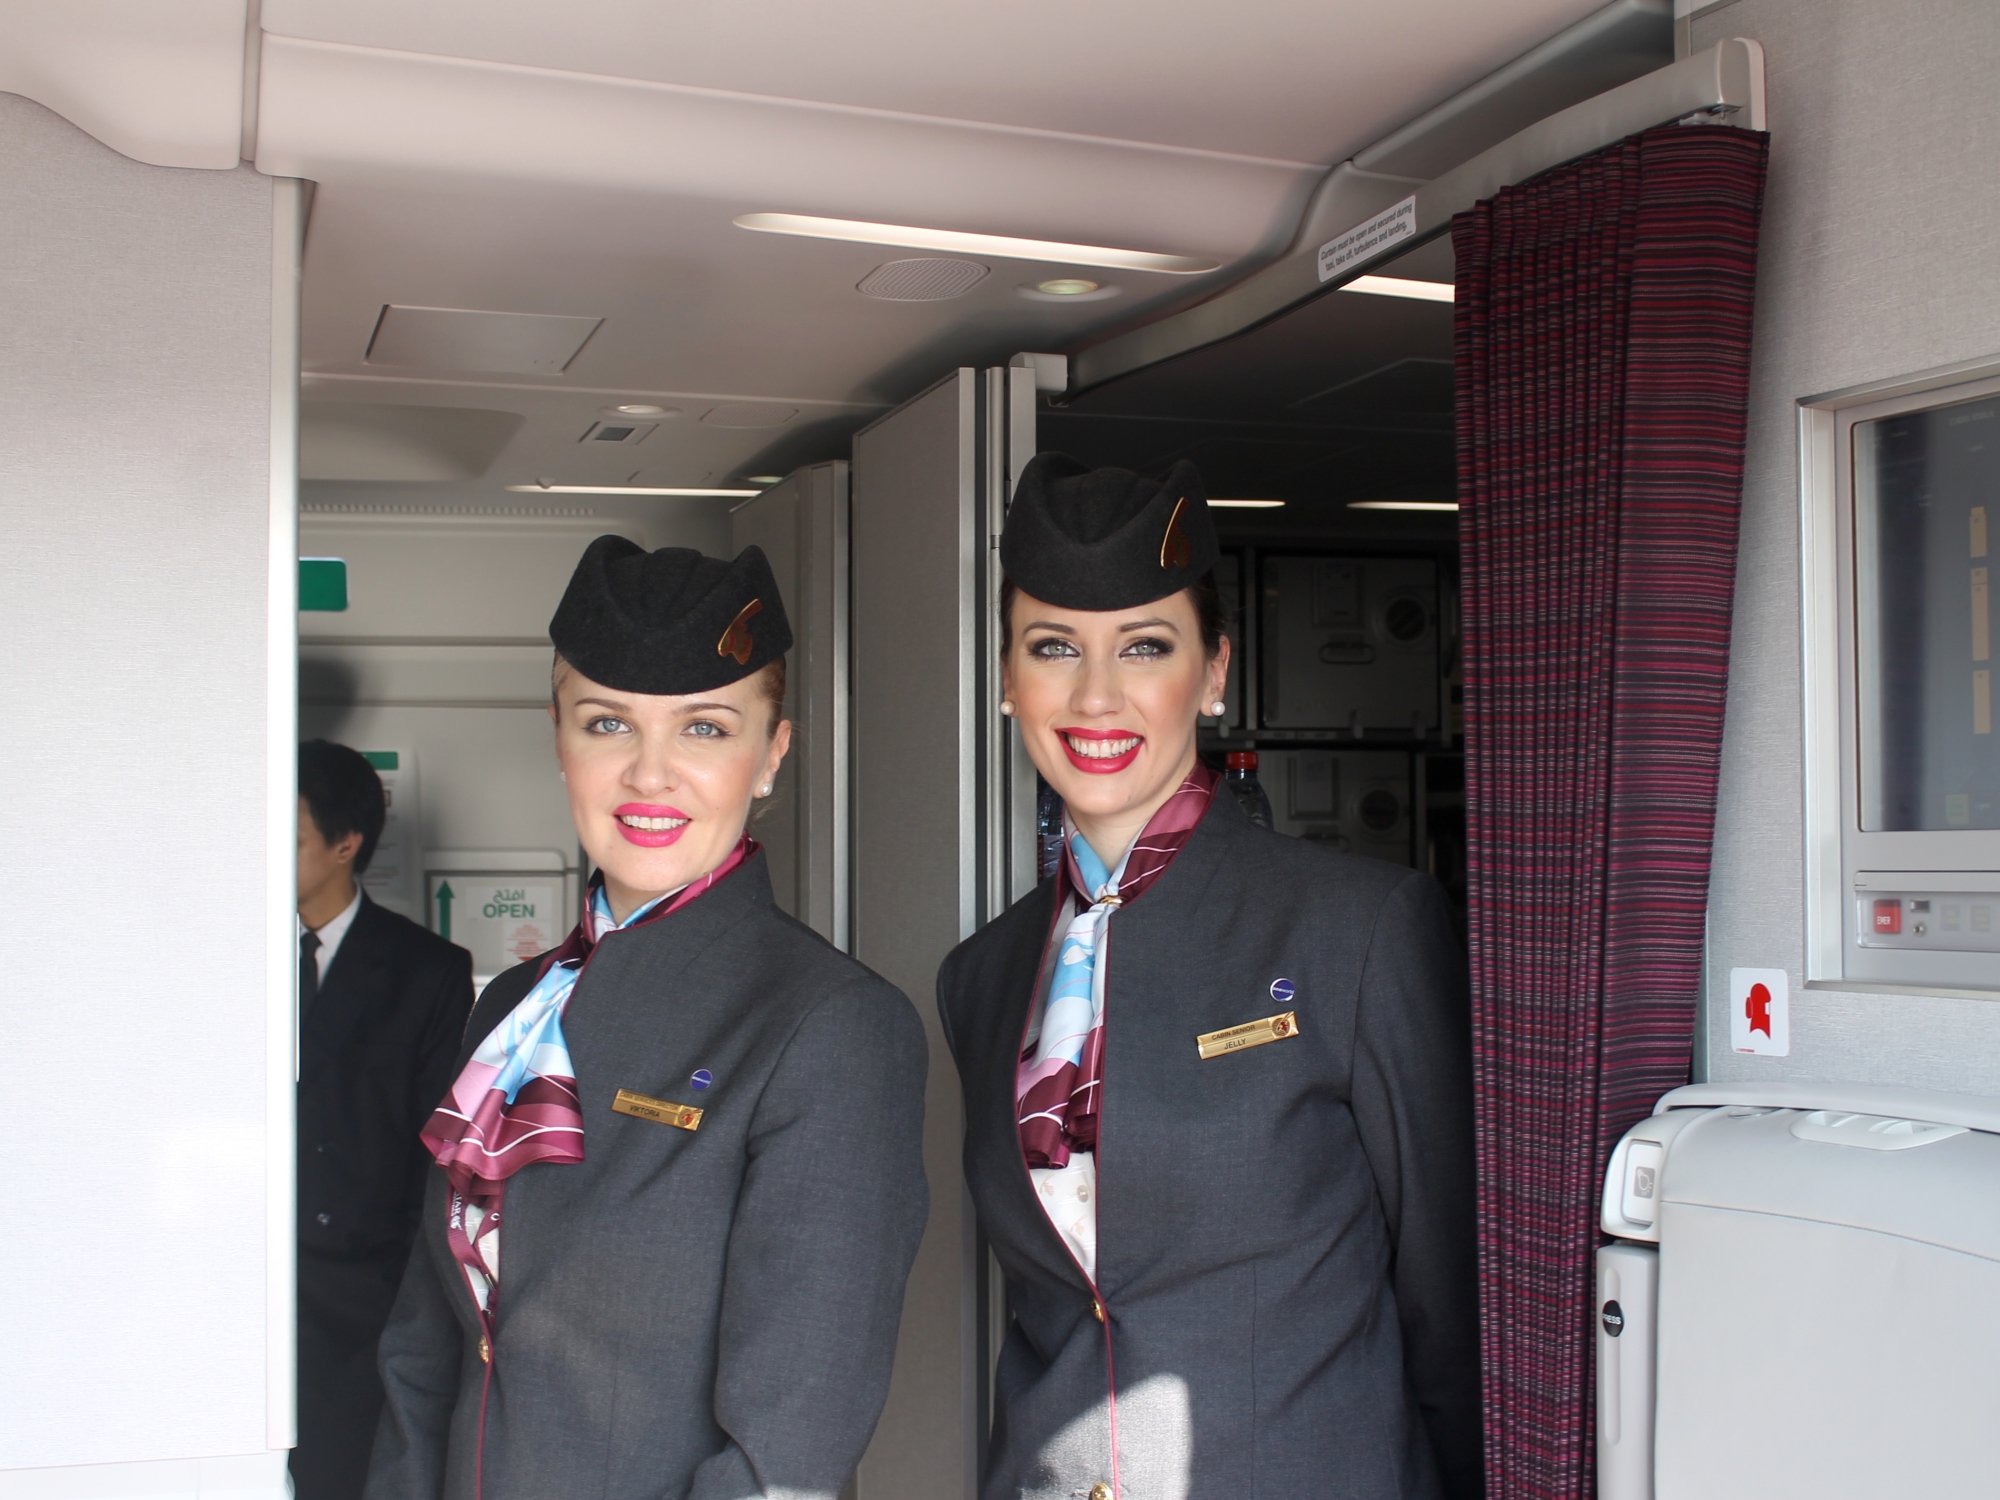 Composer periscope Performance 10 of the very best cabin crew uniforms – backpackerlee